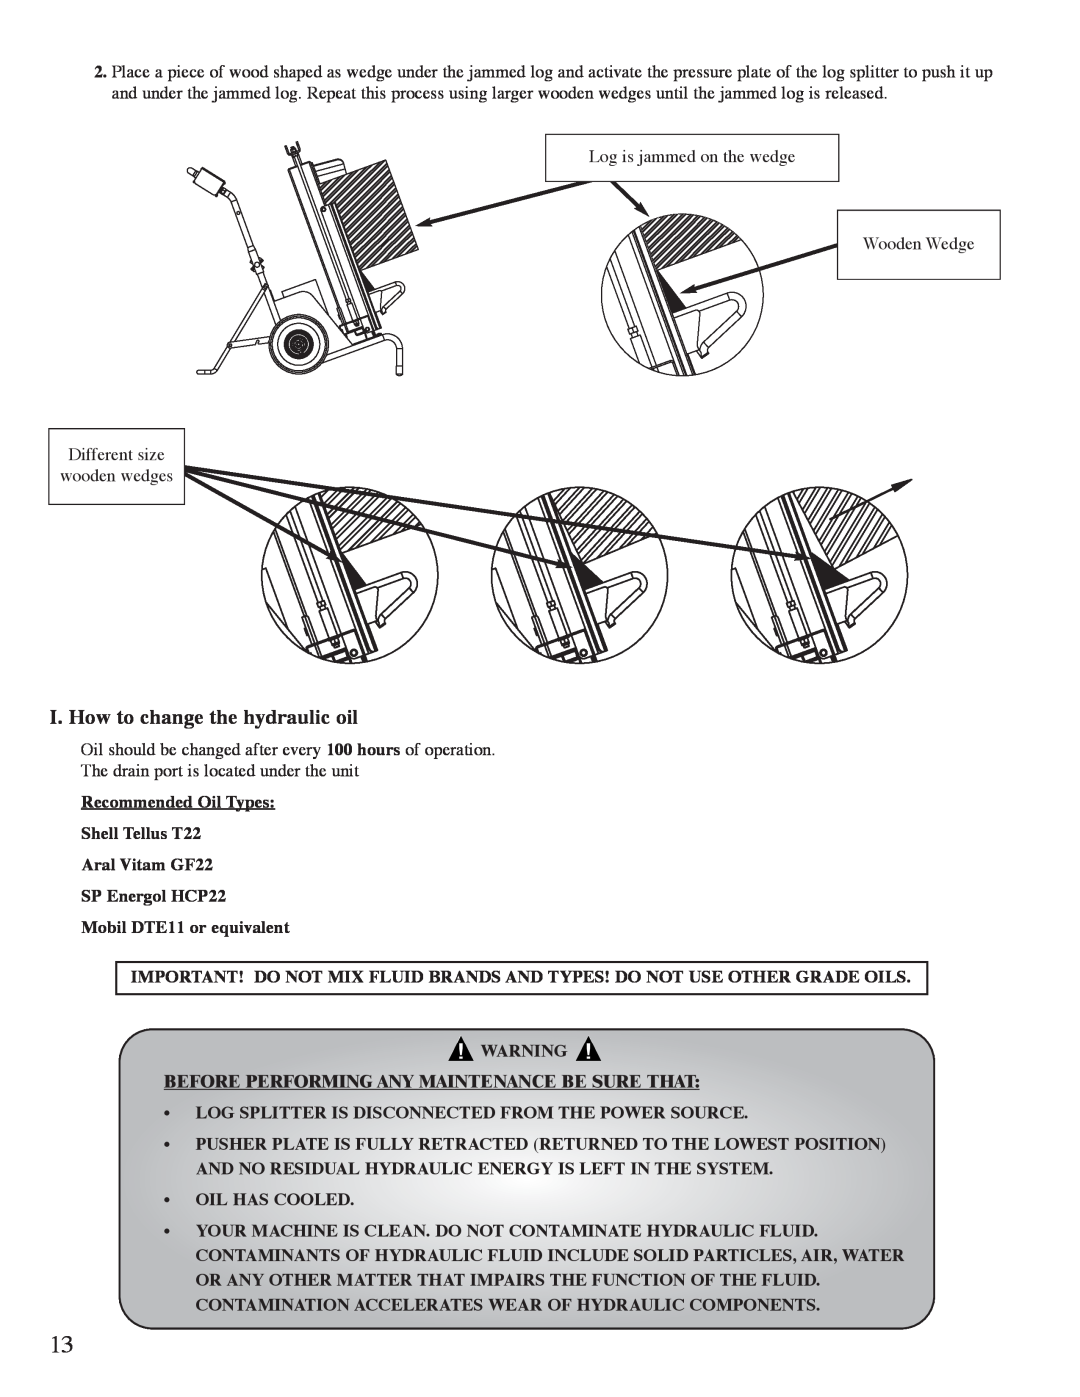 Mantis Swift Split owner manual I. How to change the hydraulic oil 